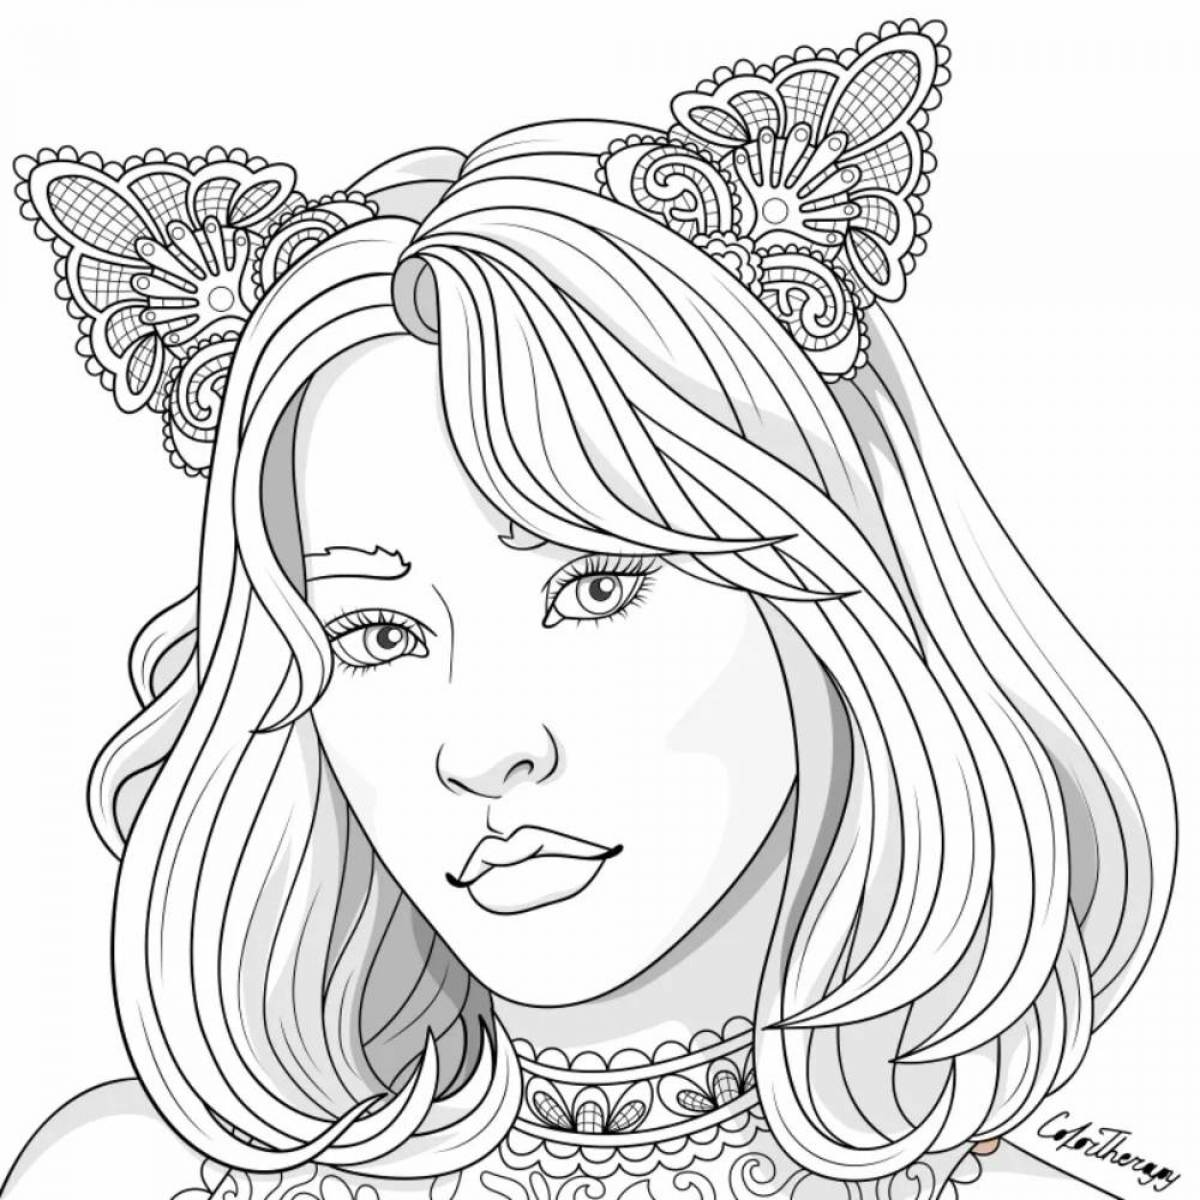 Coloring book for girls 12-13 years old